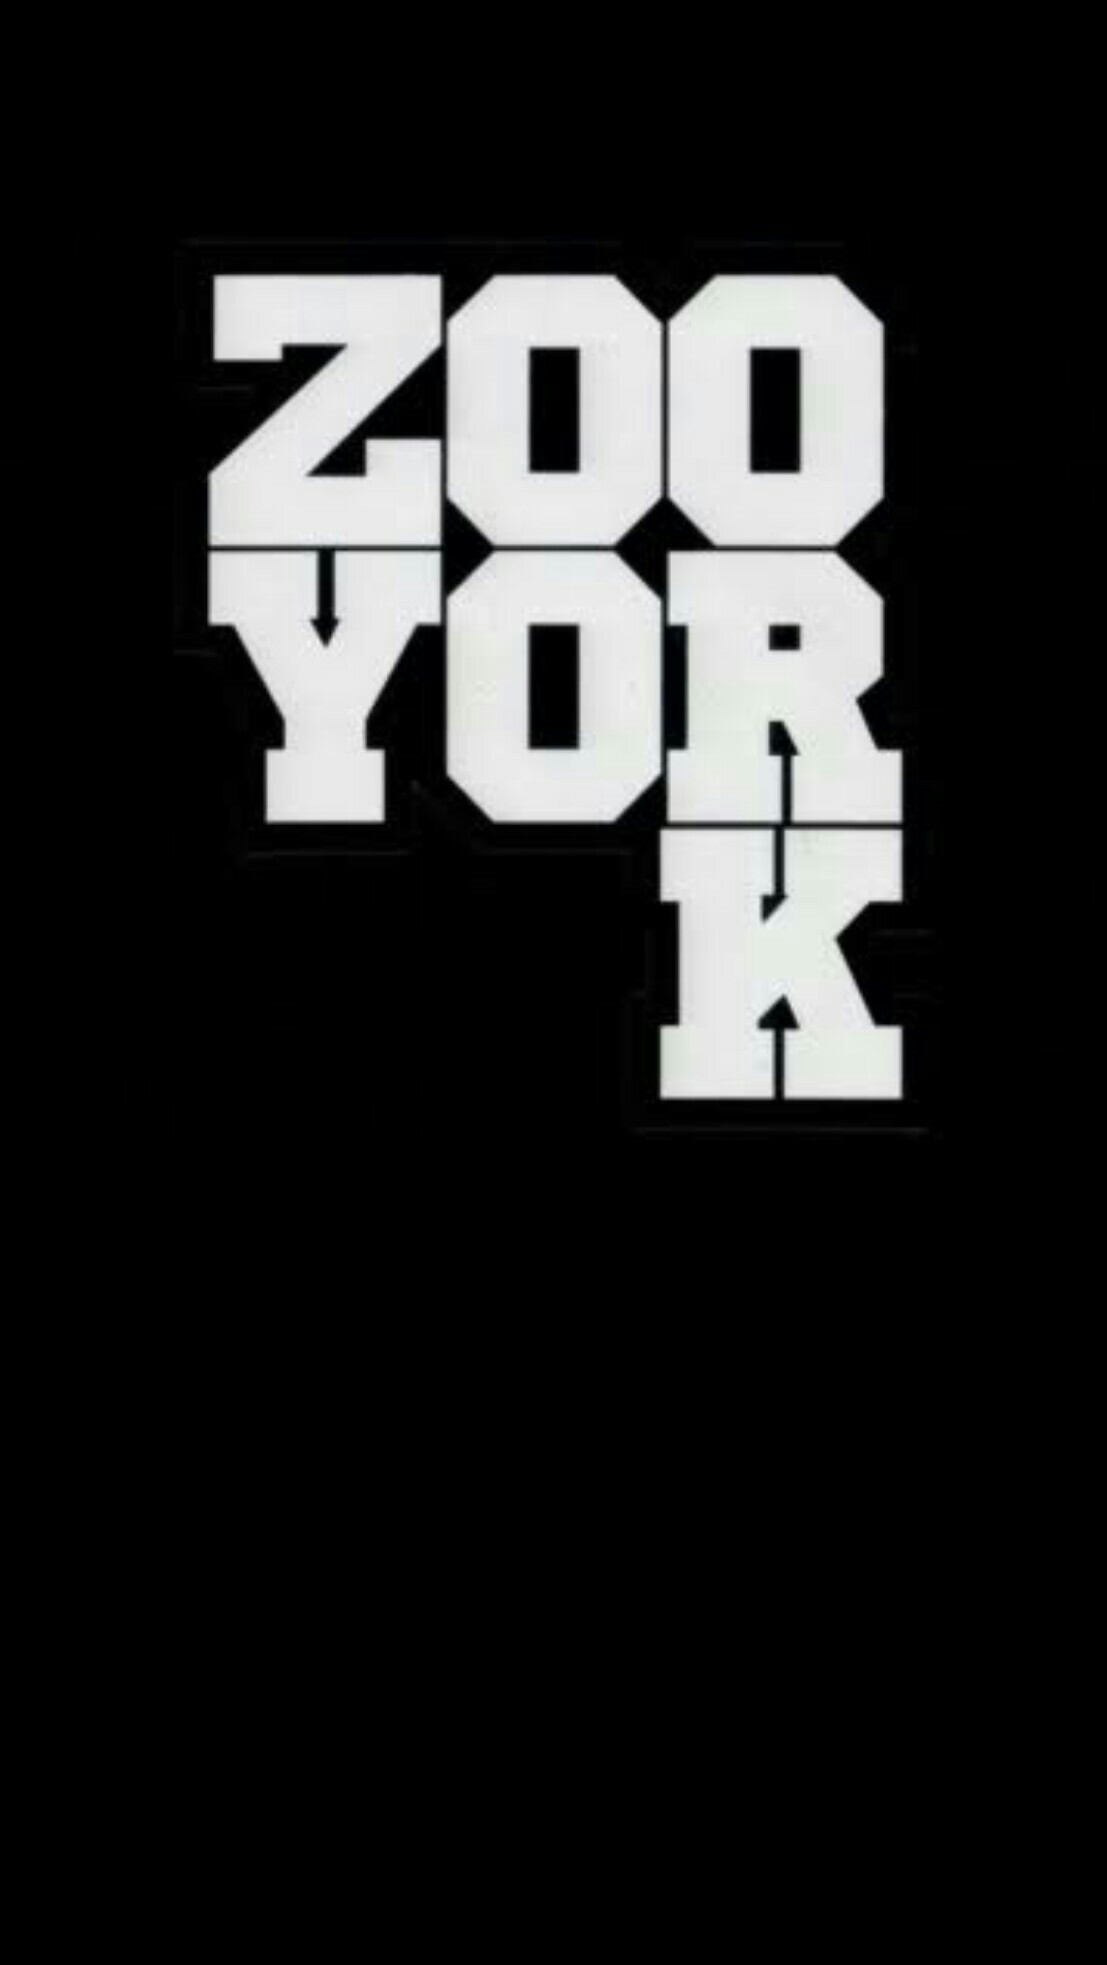 1107x1965 #zoo york #black #wallpaper #android #iphone